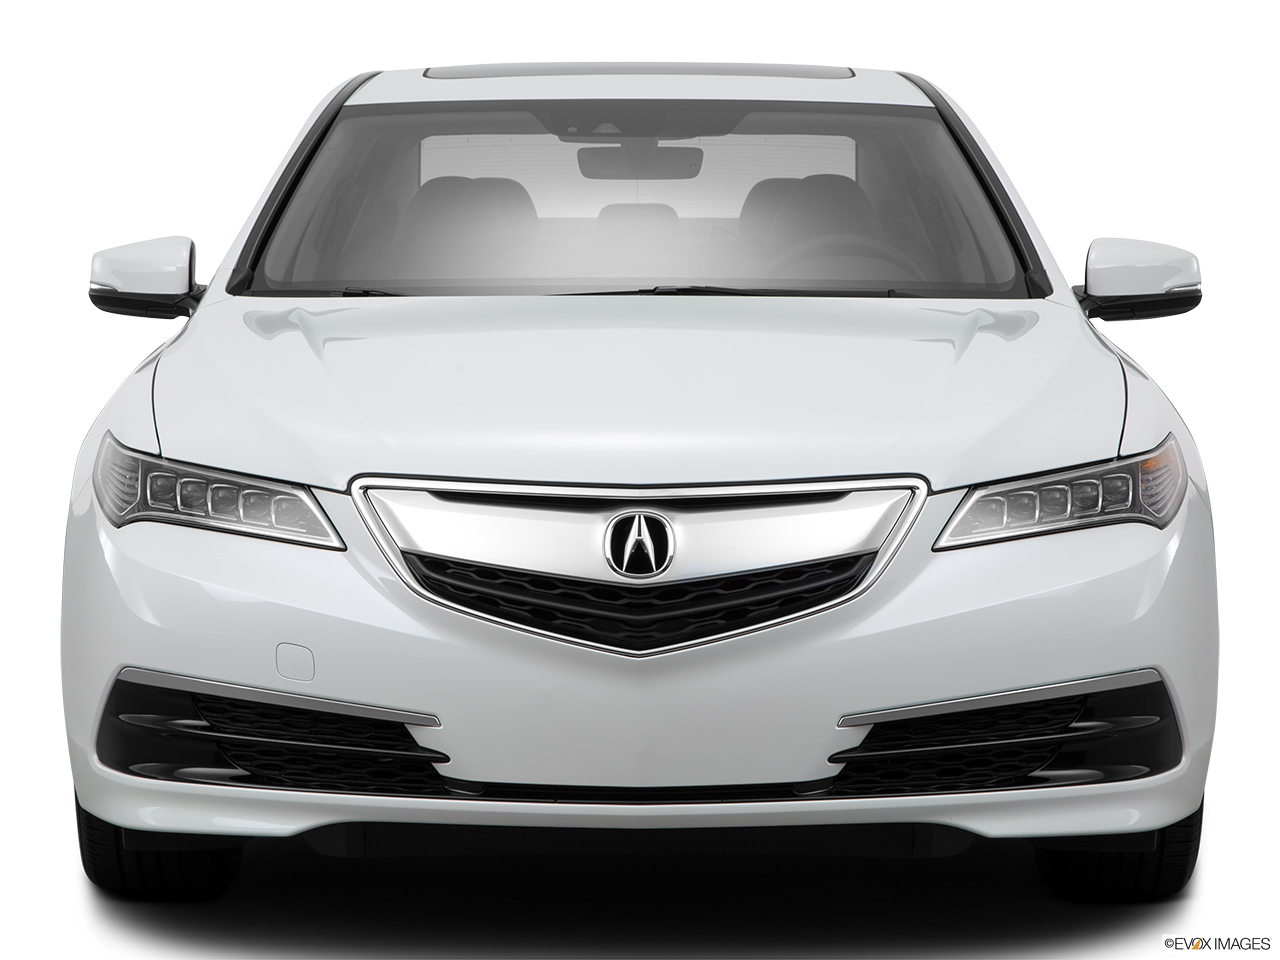 2015 Acura TLX 3.5 V-6 9-AT SH-AWD Low/wide front. 